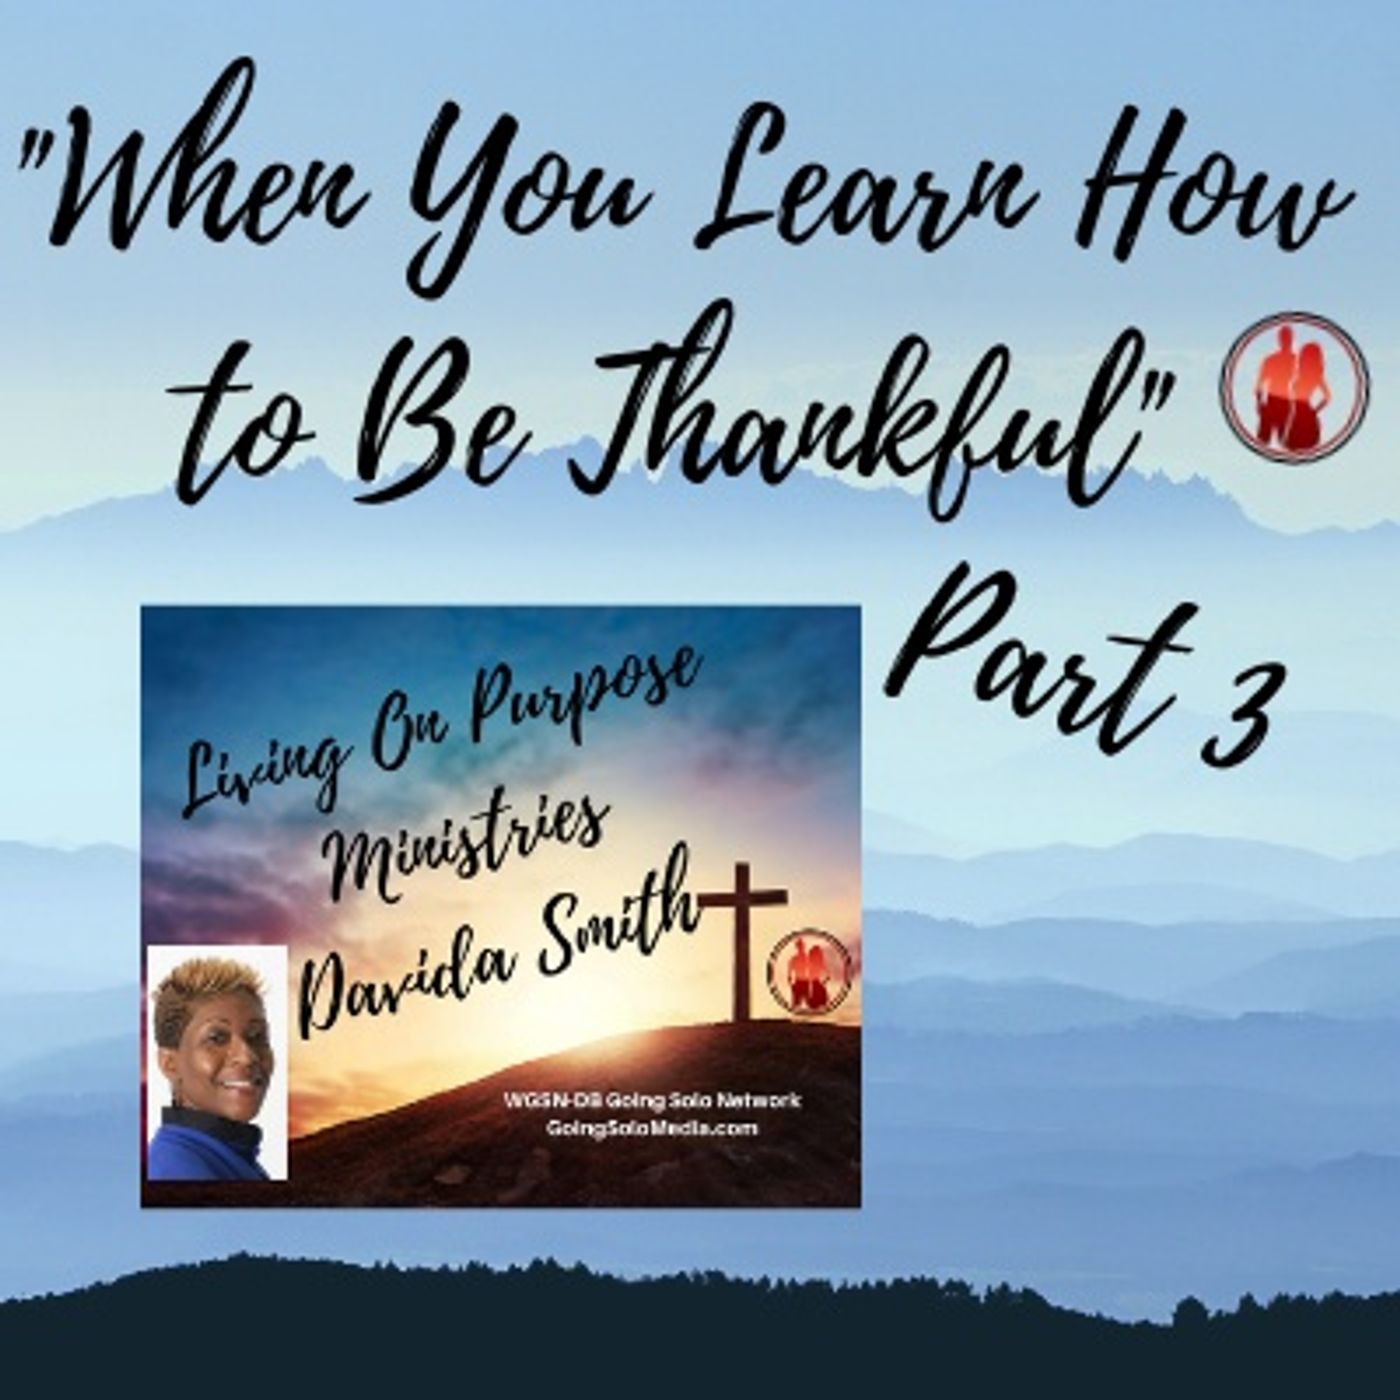 When You Learn How to Be Thankful - Part 3